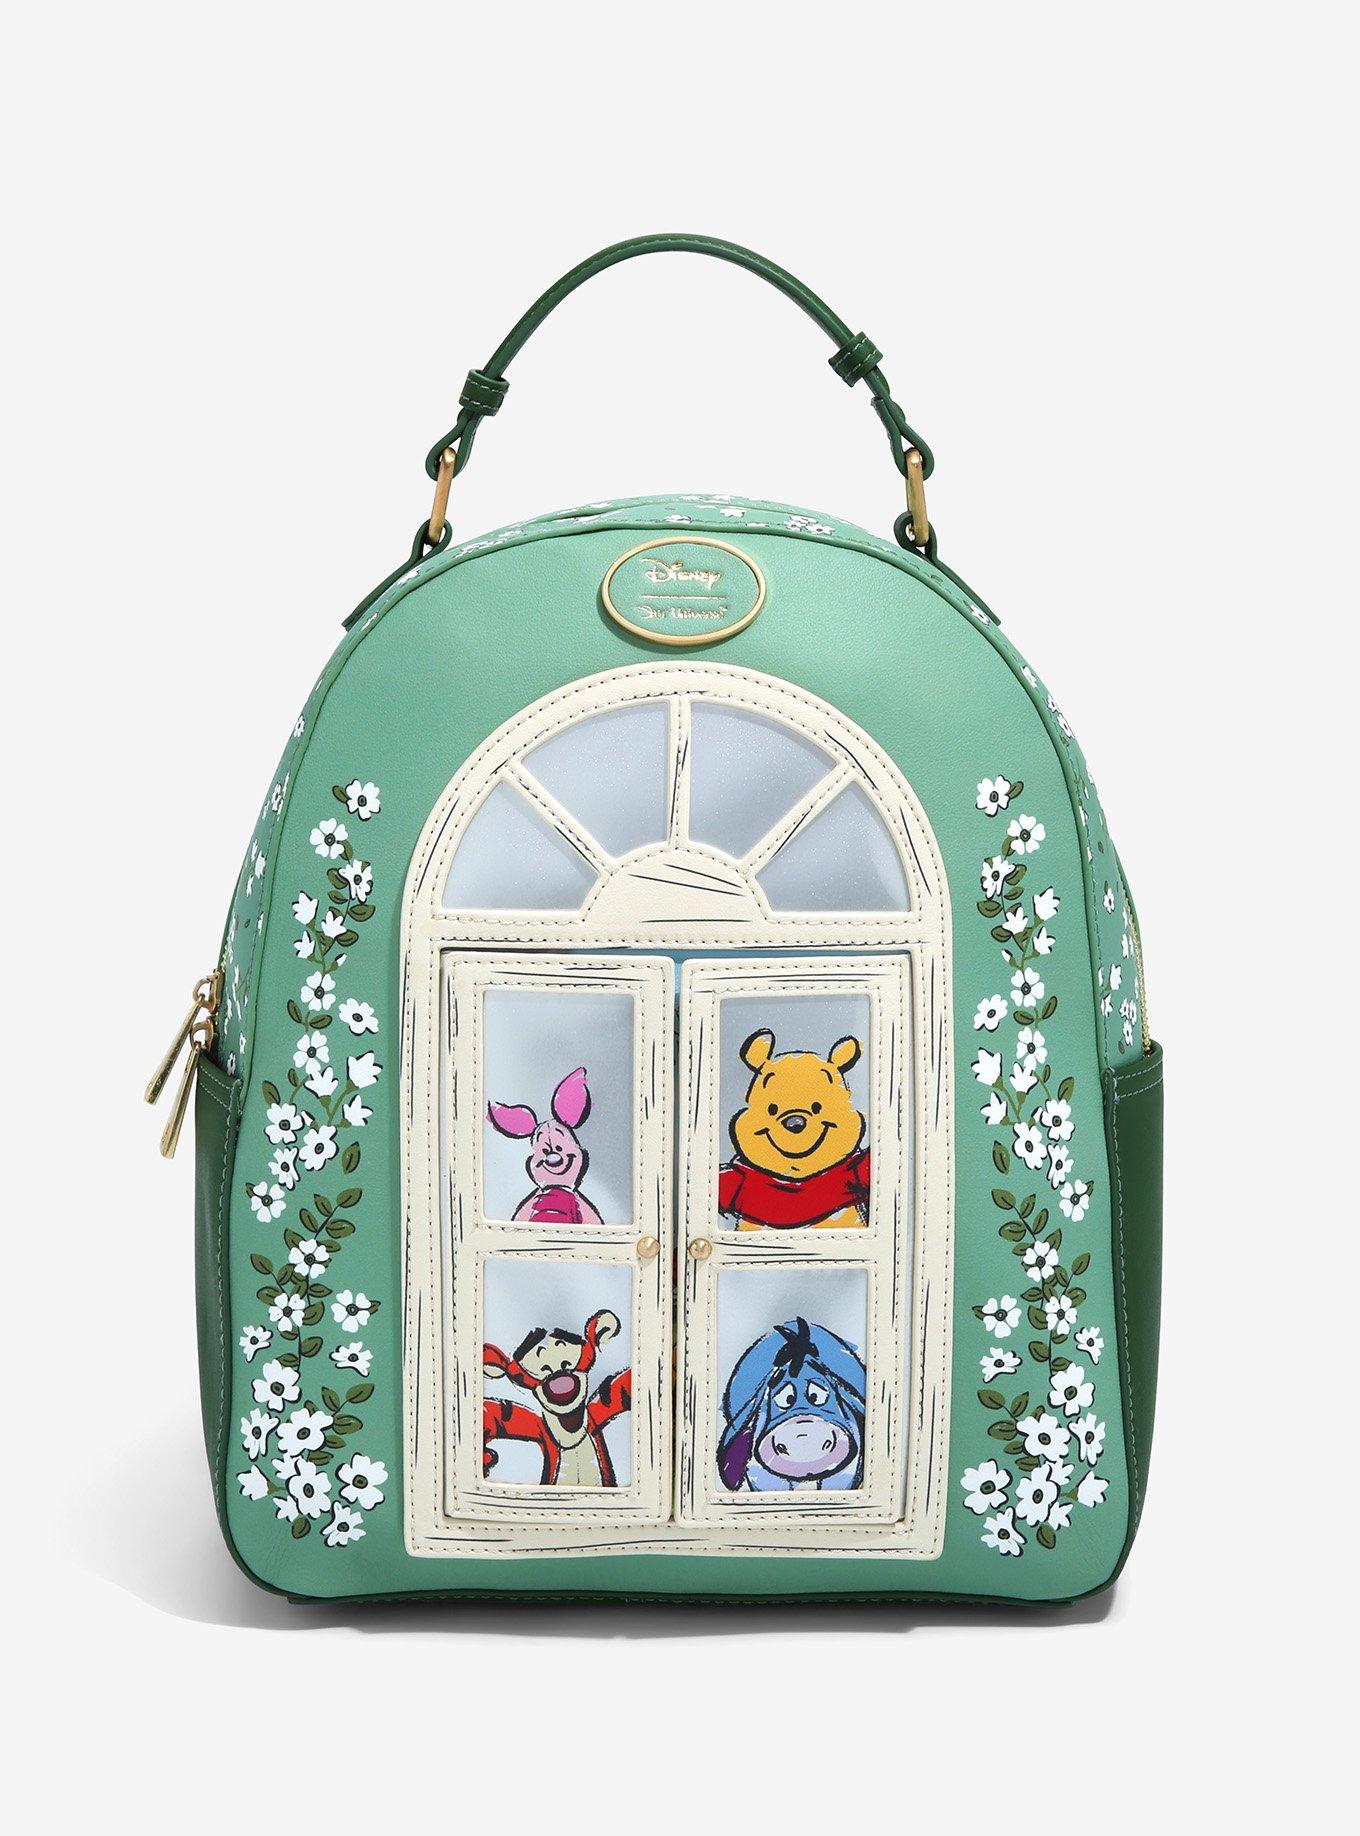 2023 boxlunch her universe sleeping beauty dress color changing mini backpack  loungefly 2 